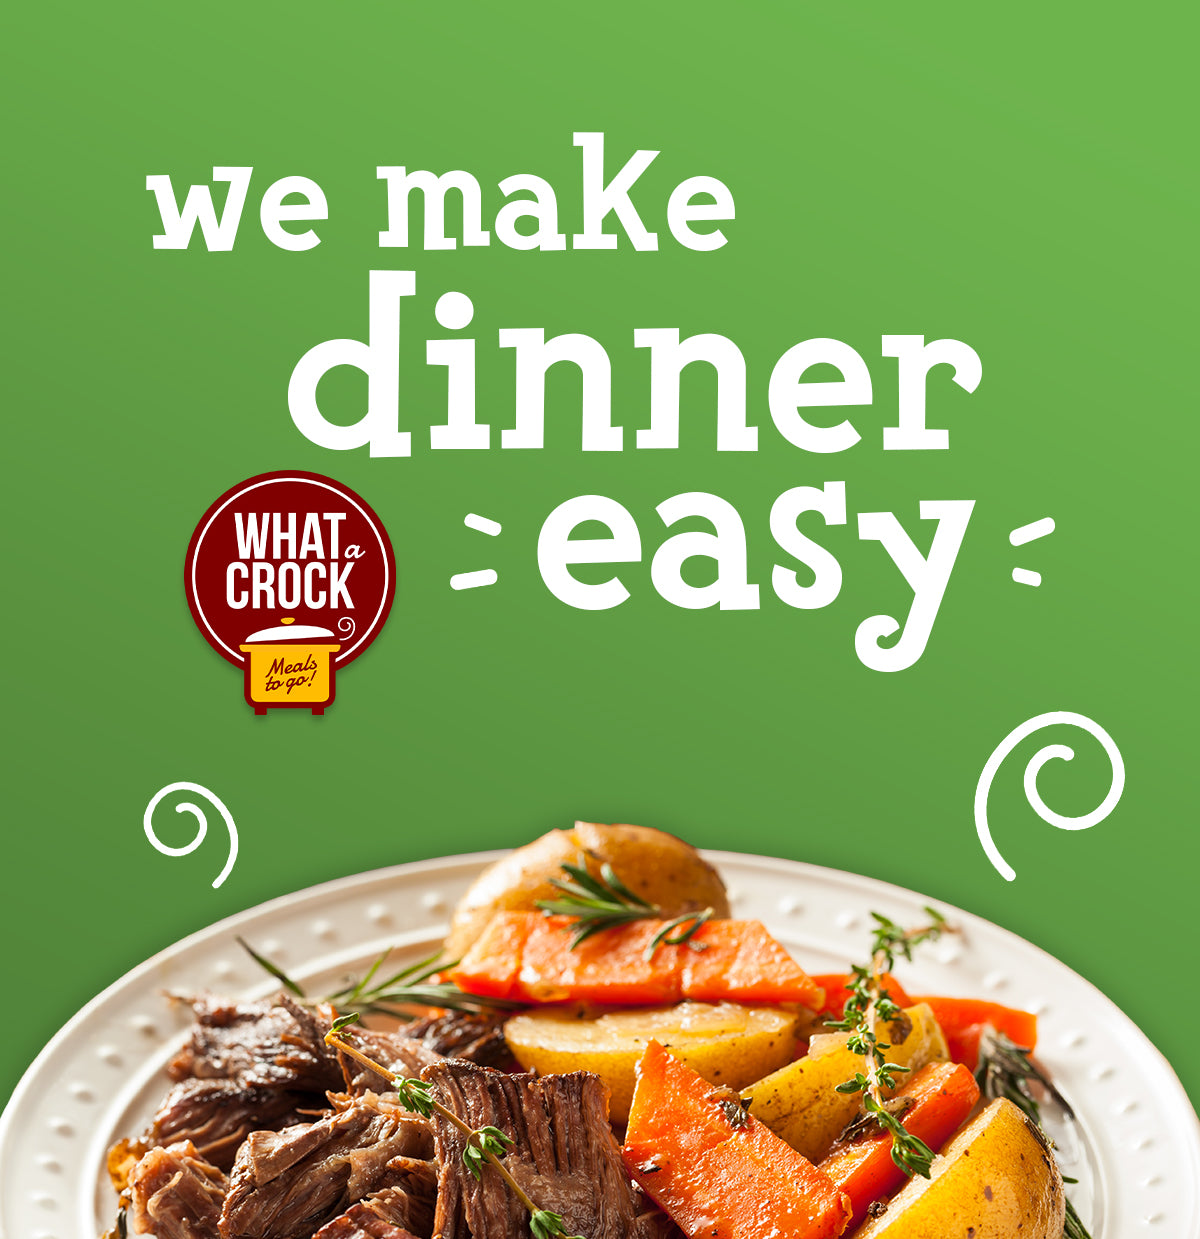 What a Crock delivers easy, prepared slow cooker & crockpot meals nationwide. America's easiest meal kit company. Boil in bag and instant pot dinners available.